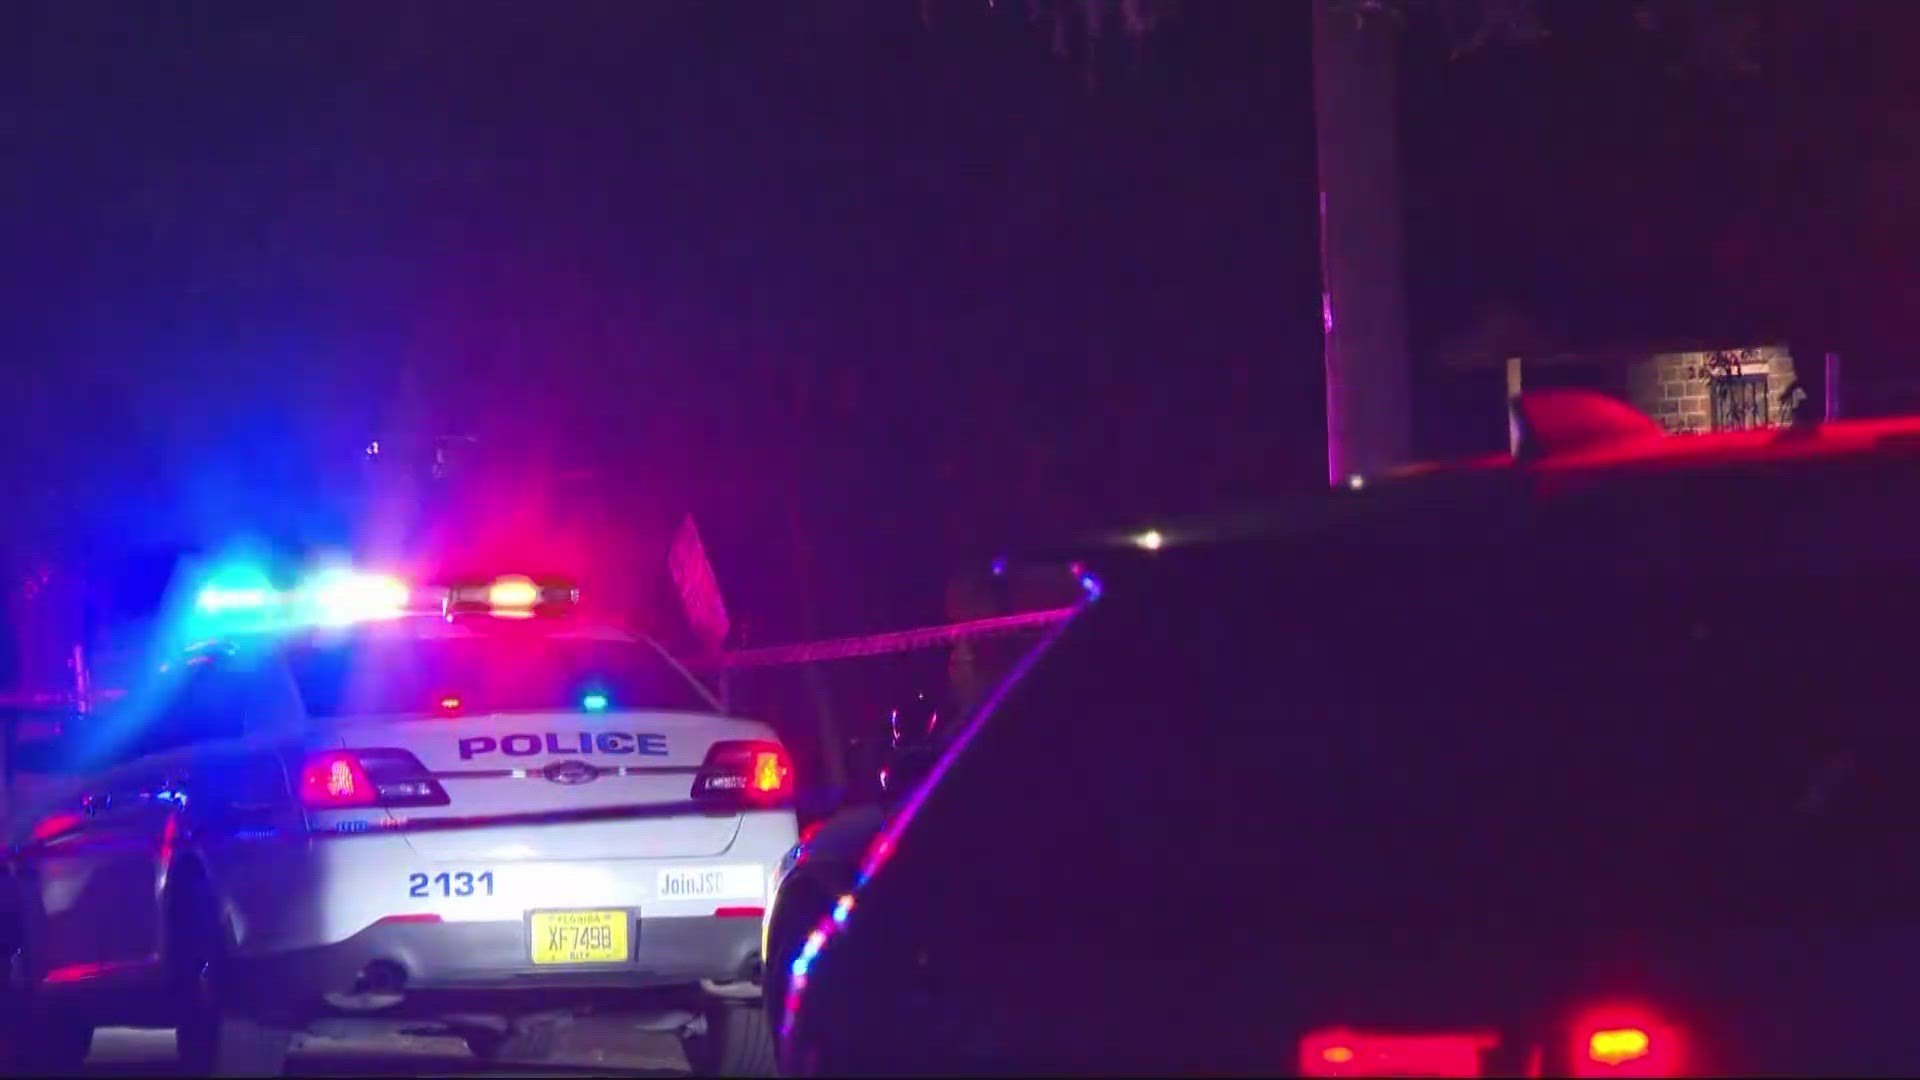 The Jacksonville Sheriff's Office report a shooting along Effee Street, left three people in life-threatening condition Wednesday. One person died of their injuries.